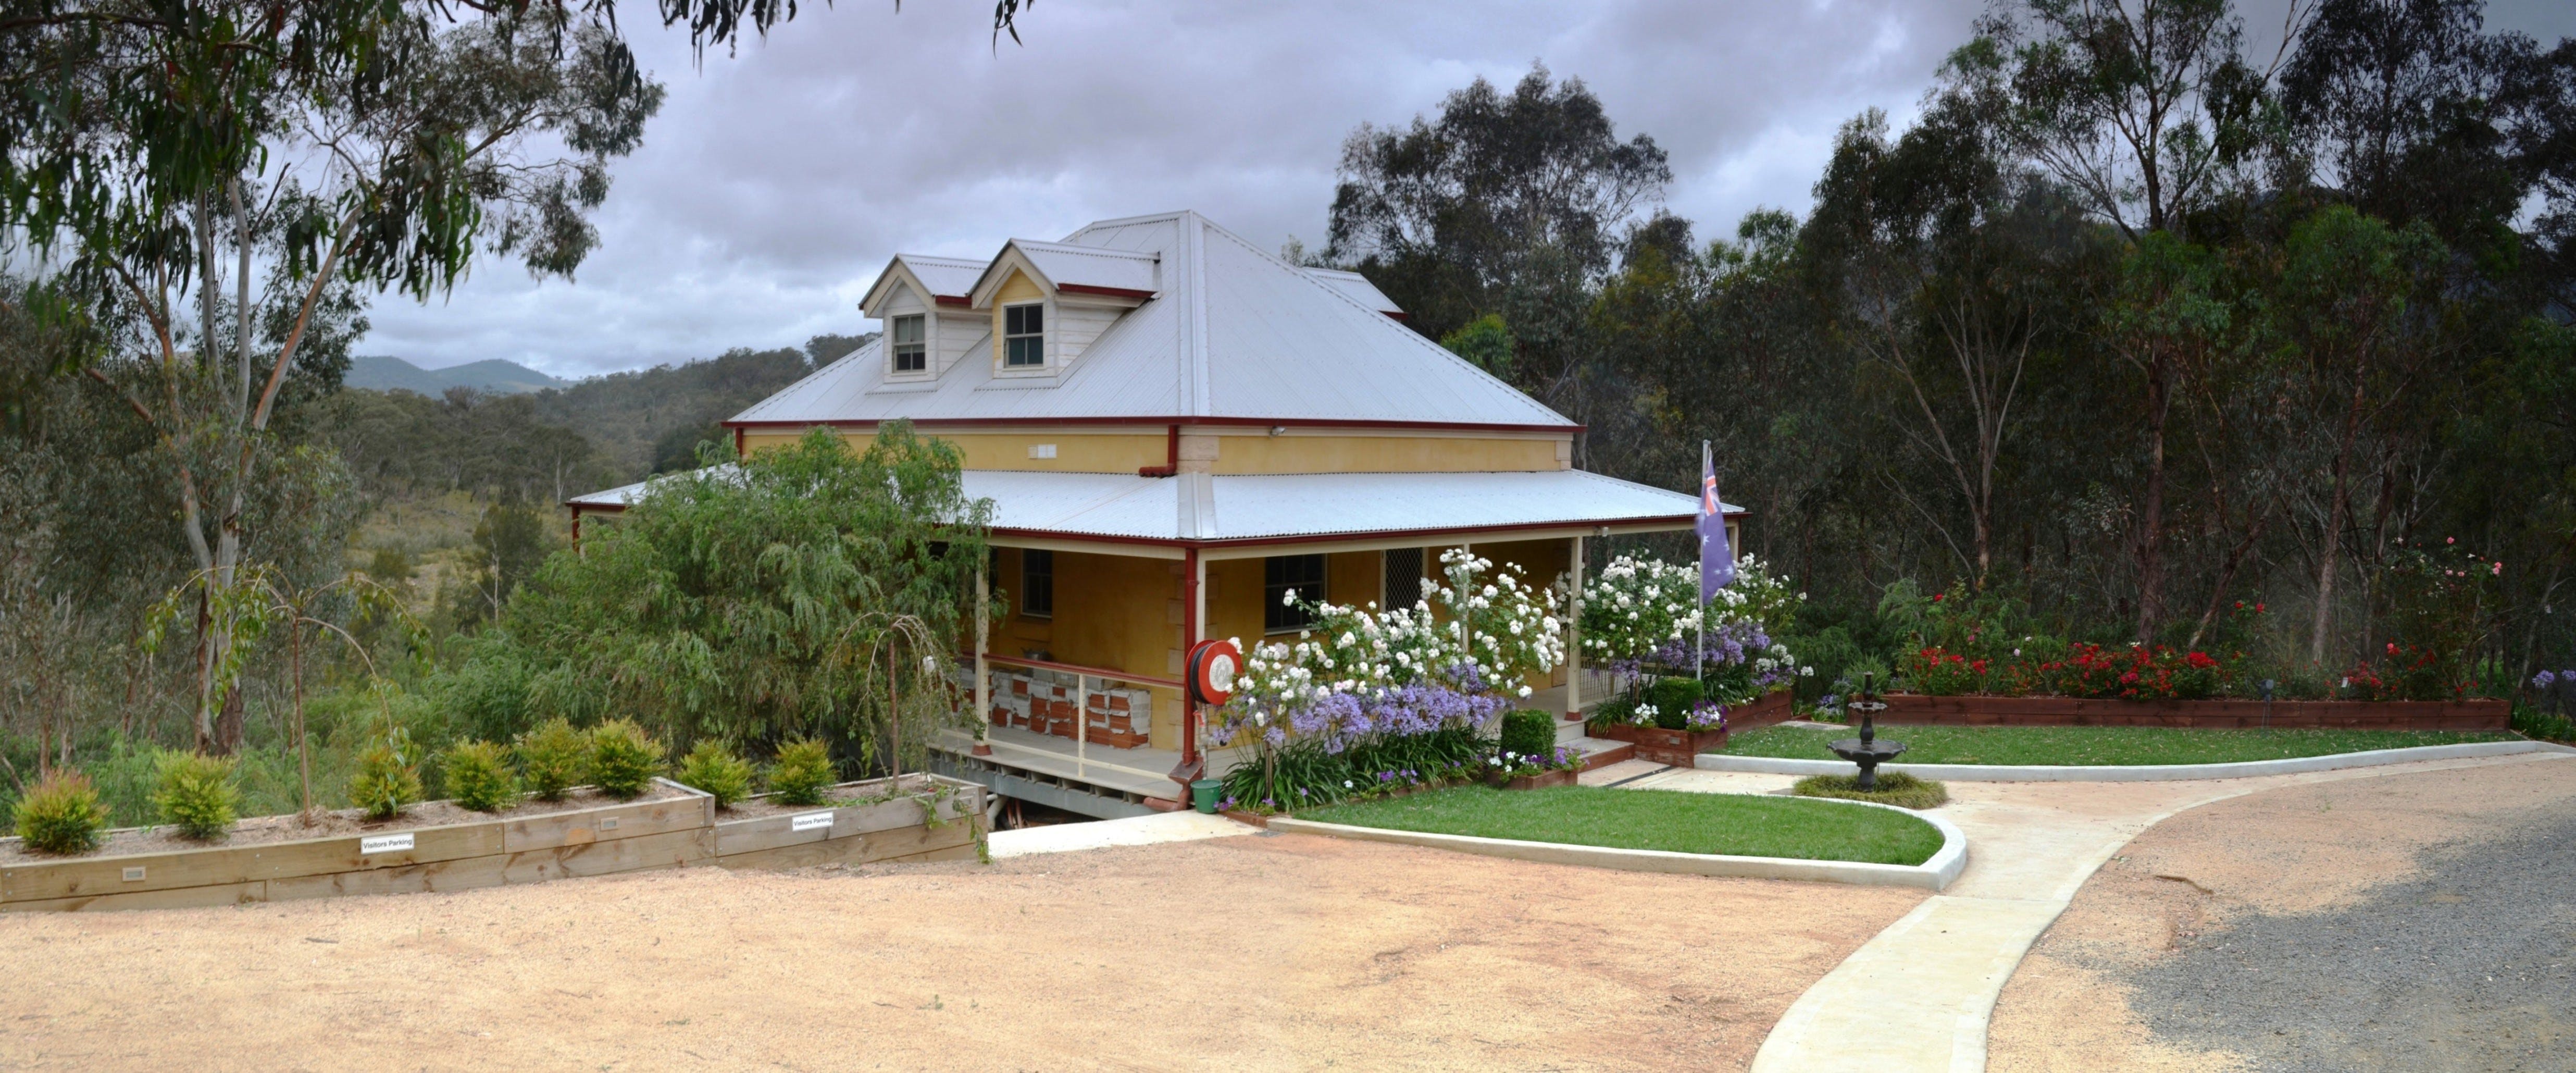 Tanwarra Lodge Bed and Breakfast - Accommodation Adelaide